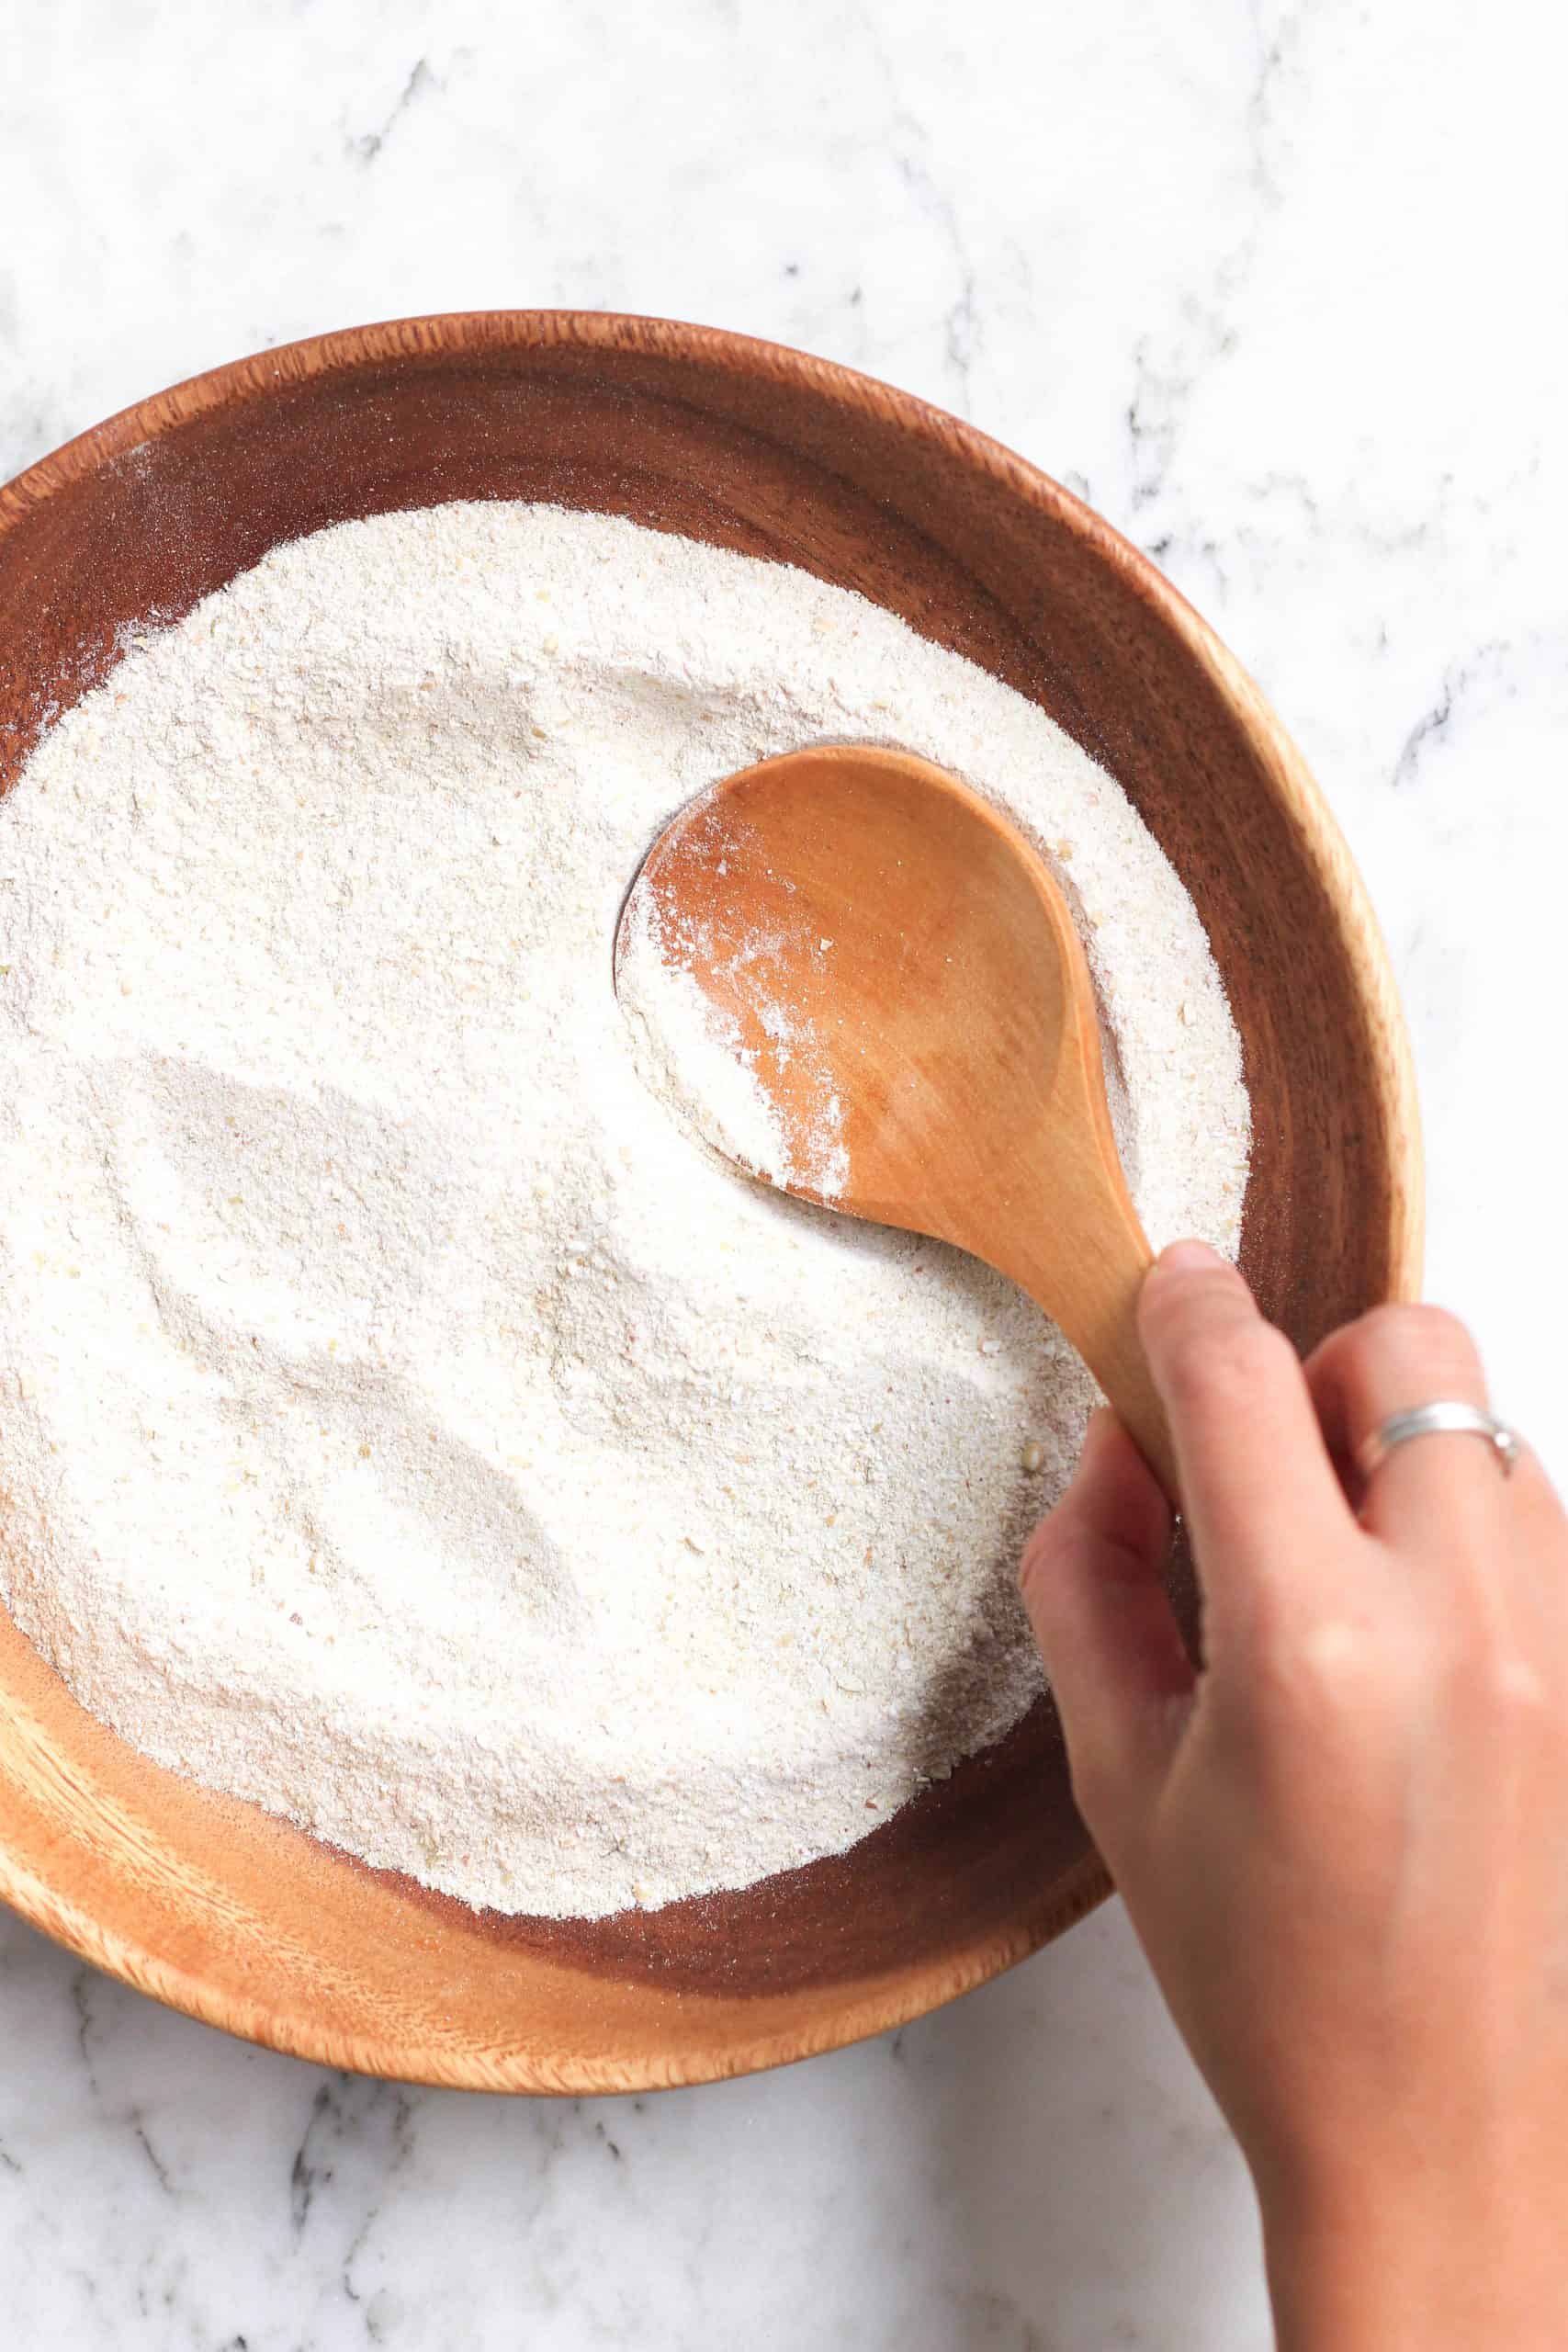 Holding a wooden spoon over a bowl of buckwheat flour.